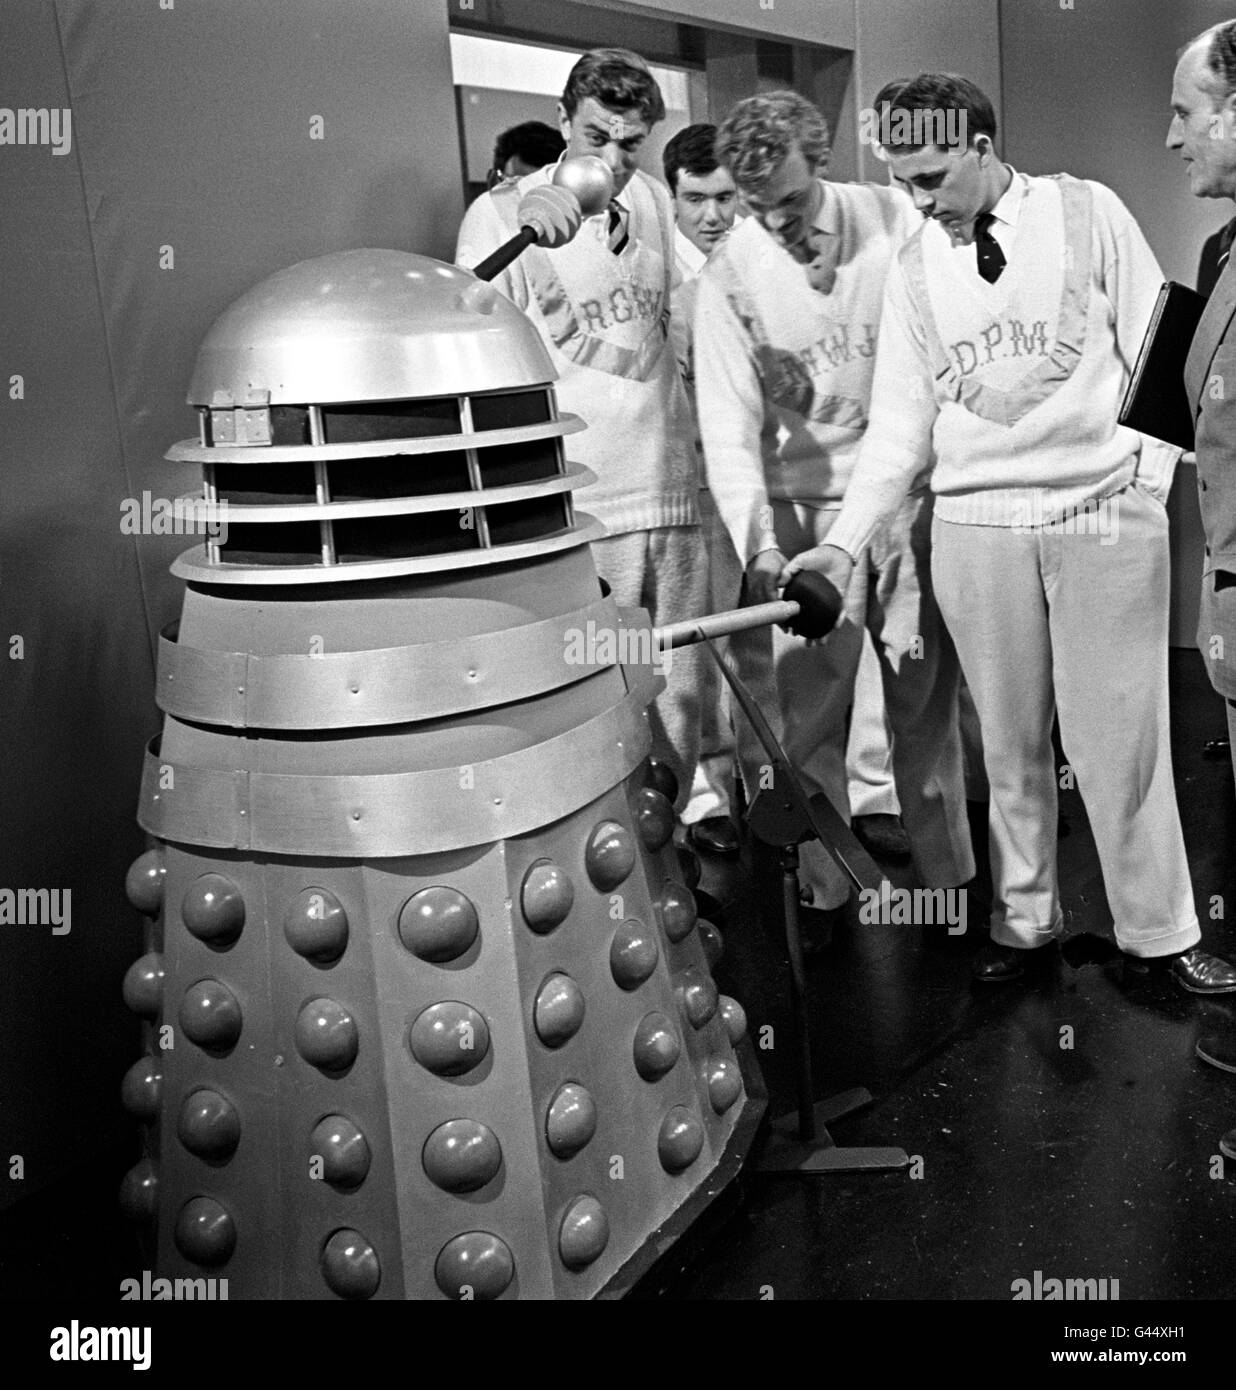 Members of the Cambridge crew, away from training, get a close-up of a Dalek, from Dr Who, during an eve of the Boat Race visit to the BBC's Television Centre, Shepherd's Bush Stock Photo